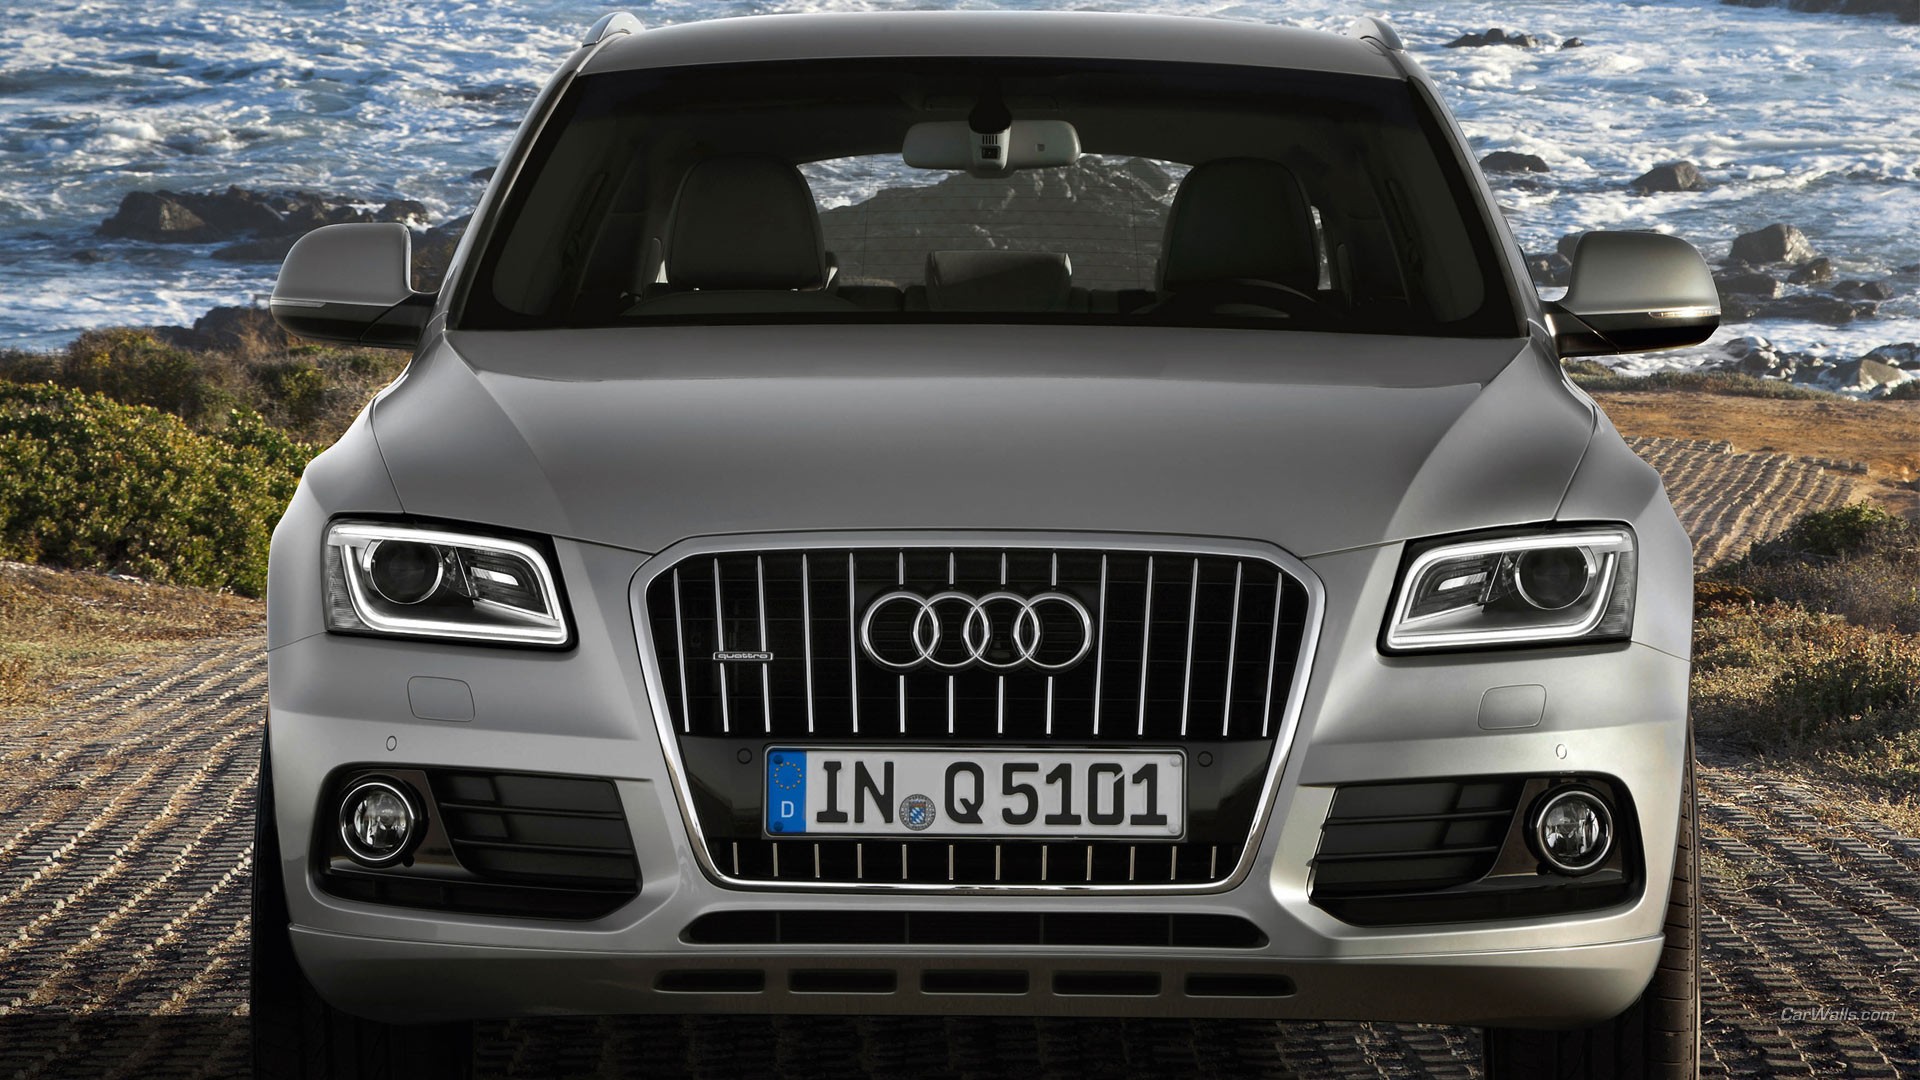 General 1920x1080 Audi Q5 Audi car vehicle German cars Volkswagen Group SUV silver cars frontal view licence plates clouds headlights watermarked sky closeup